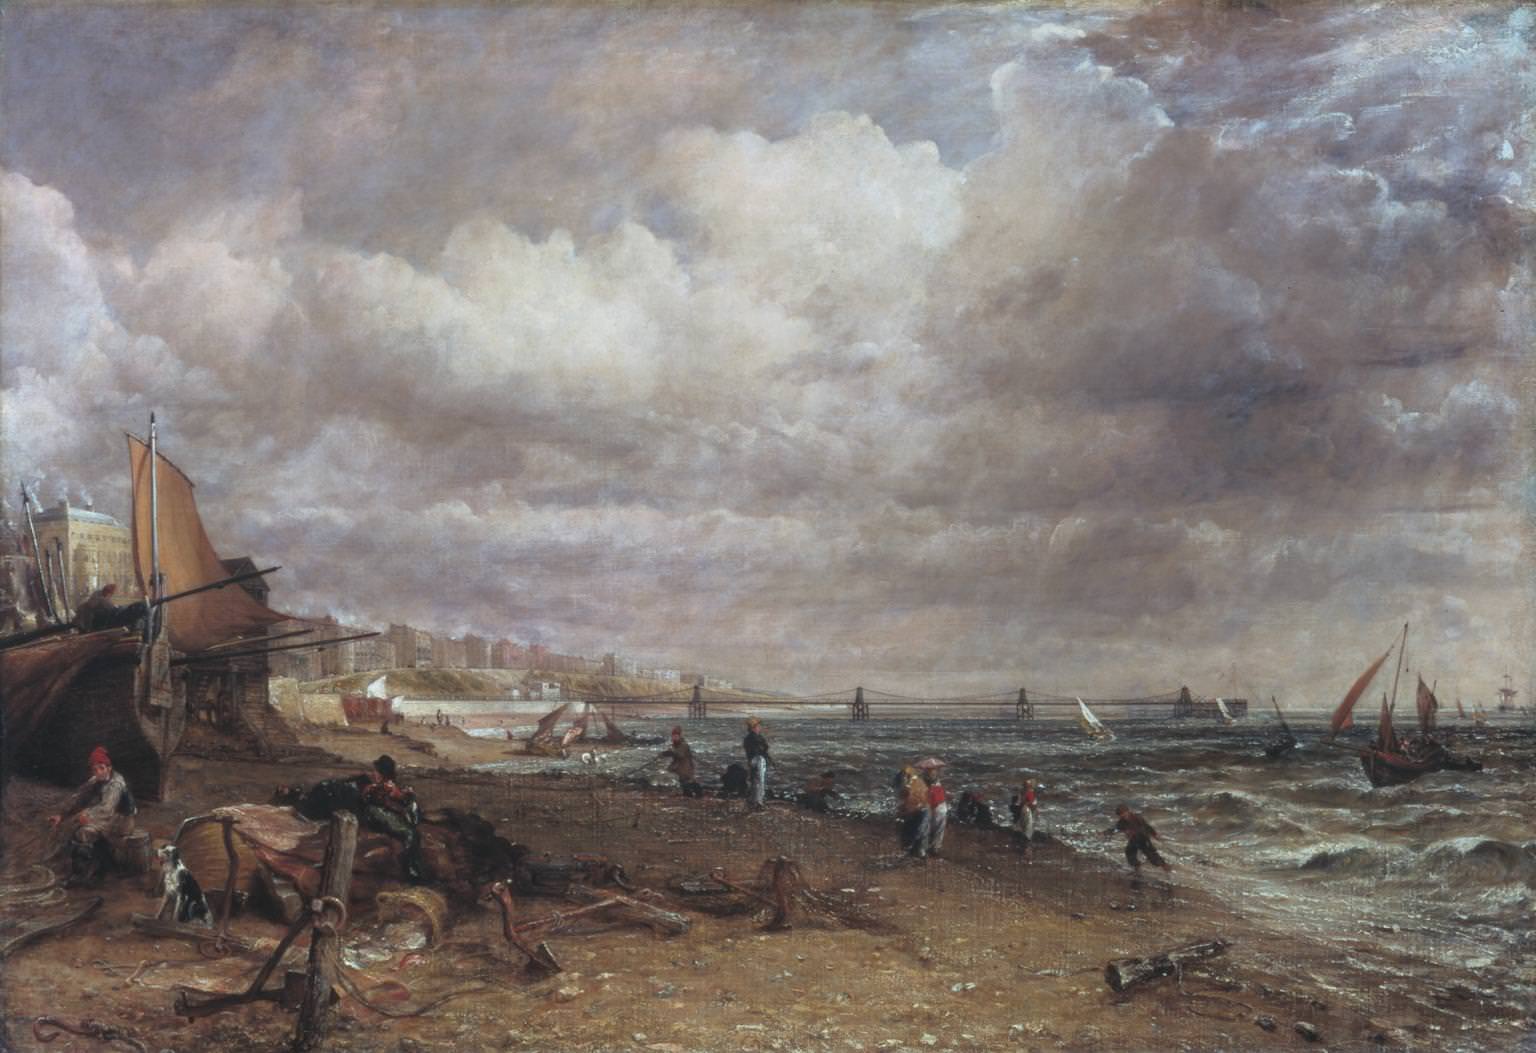 1826–7, oil on canvas, 127 x 182.9 cm. Collection of Tate (N05957).